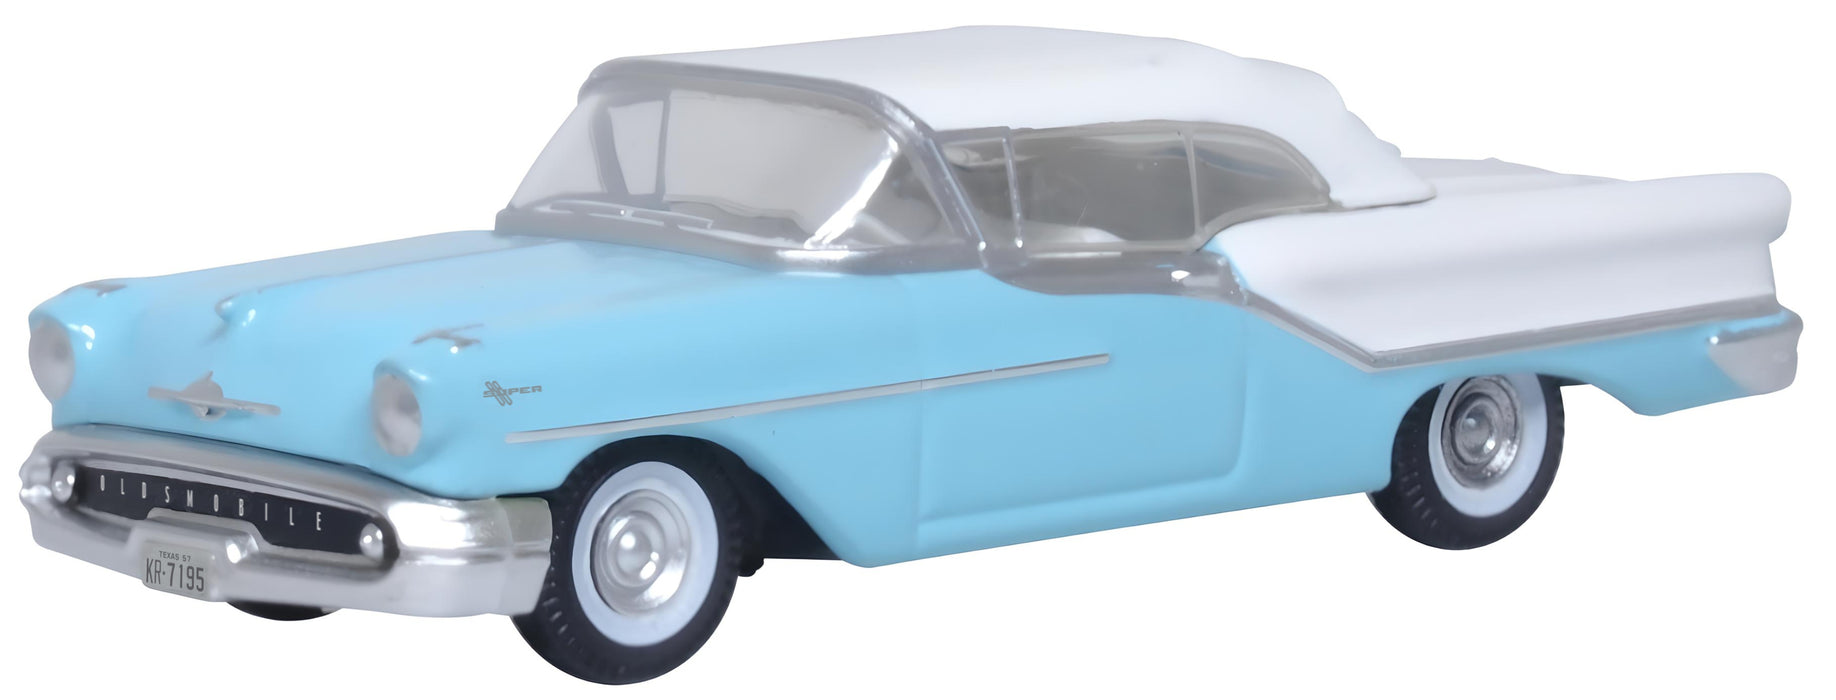 Oxford Diecast Oldsmobile 88 Convertible 1957 (Roof Up) Banff Blue and Alcan White by Oxford at 1:87 scale.